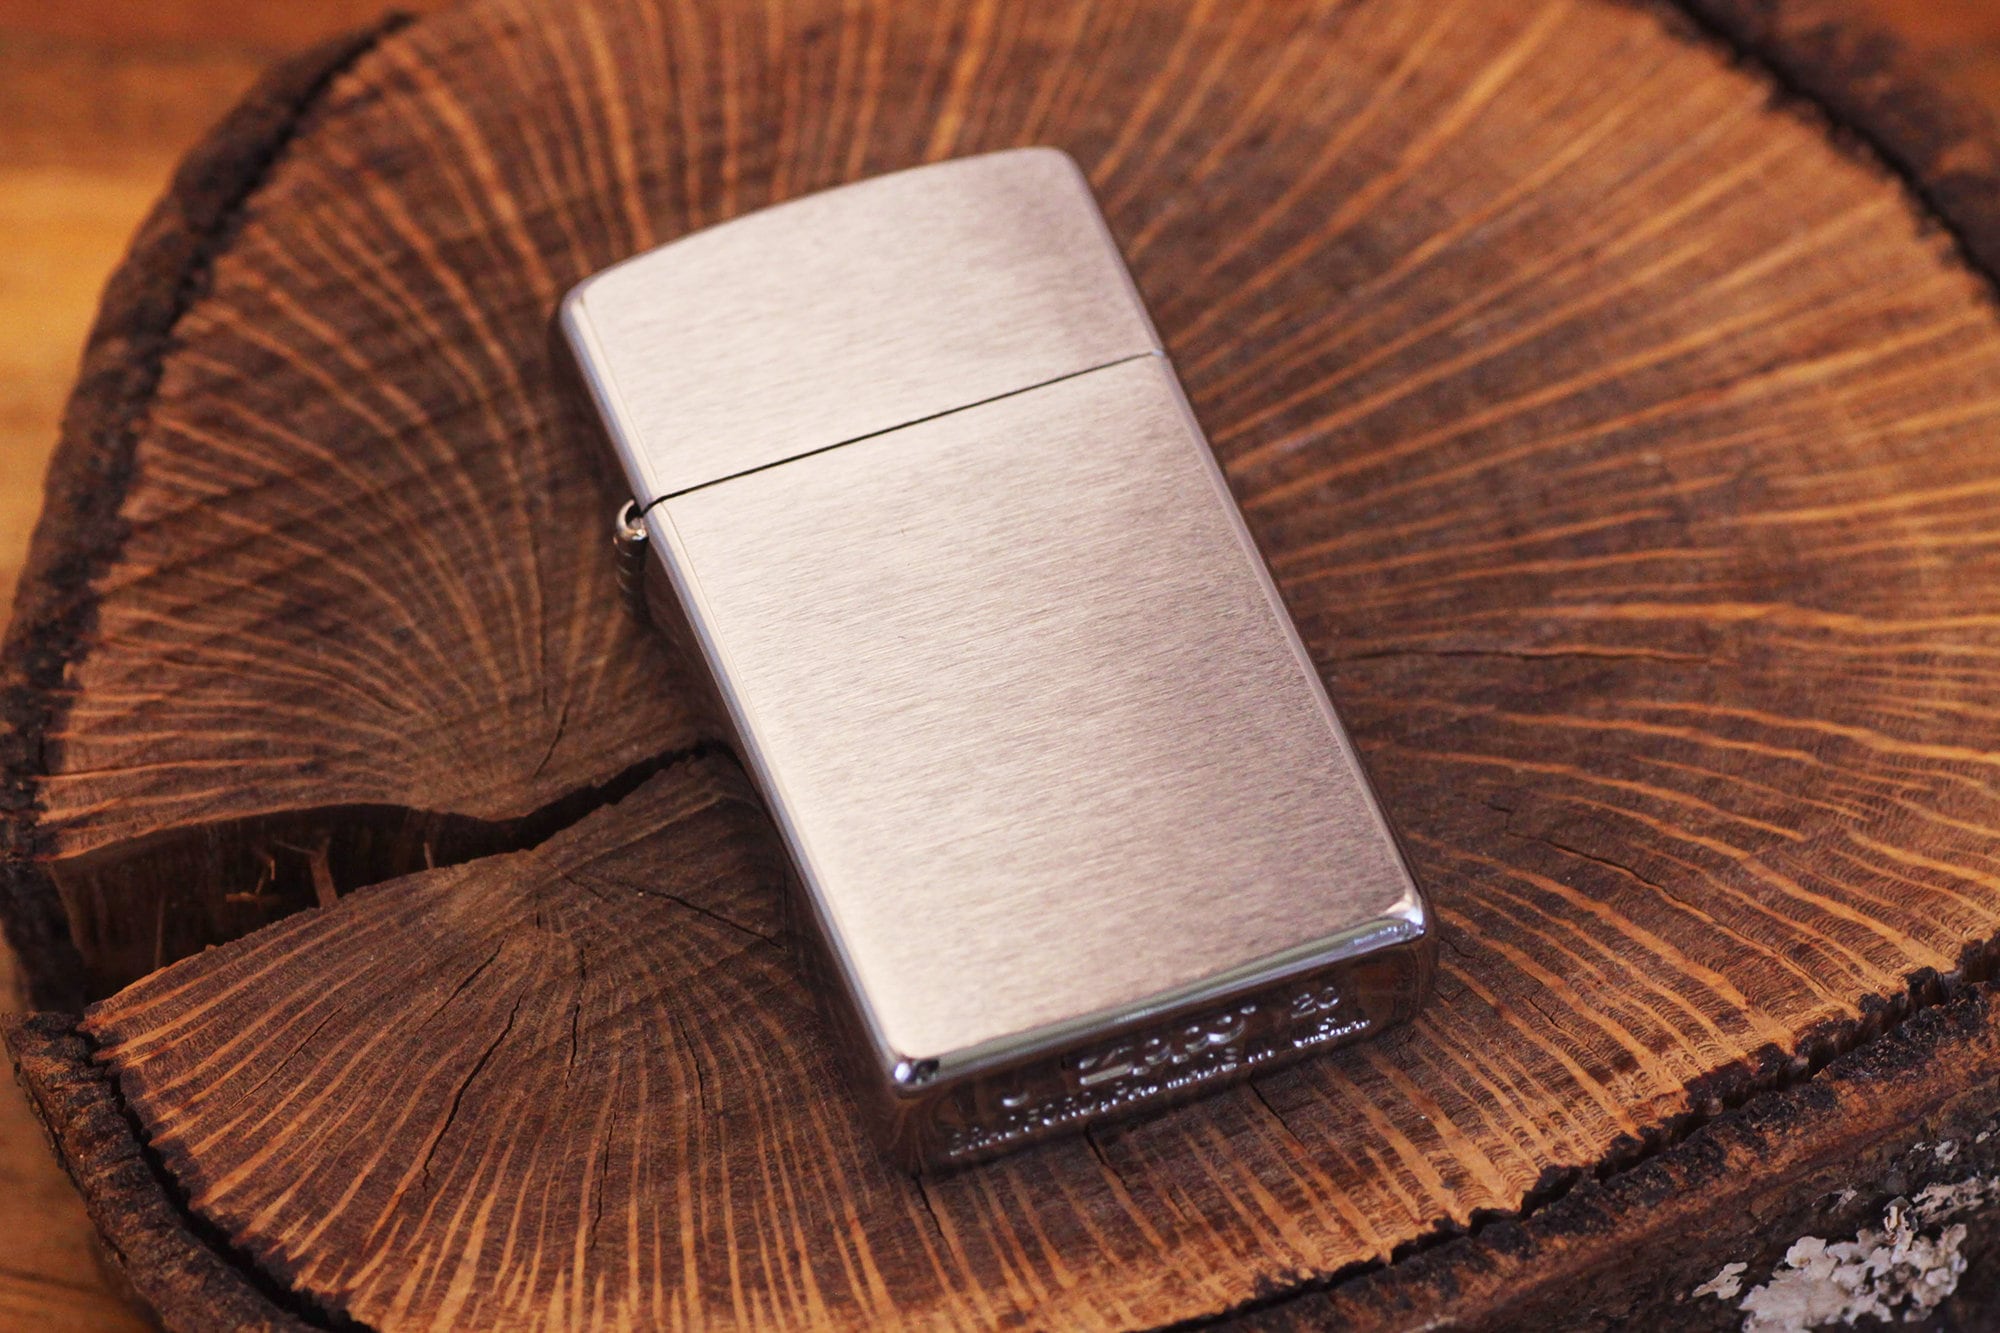 Dual Print Zippo Lighter - Brushed Chrome – LegacyTouch